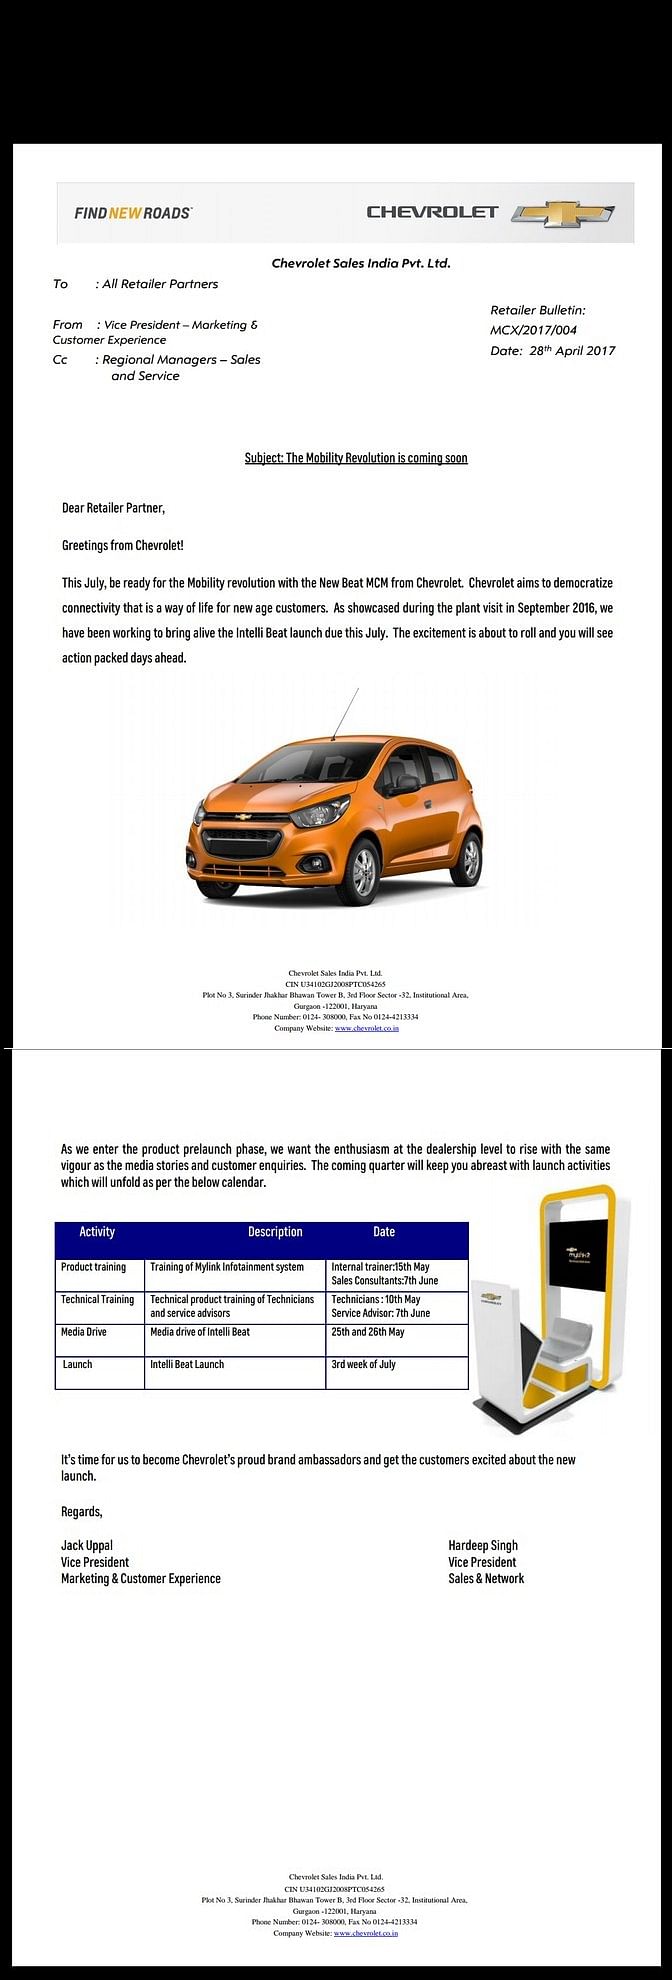 General Motors is set to launch the new Chevrolet Beat in July, preceded by a media preview in May. 